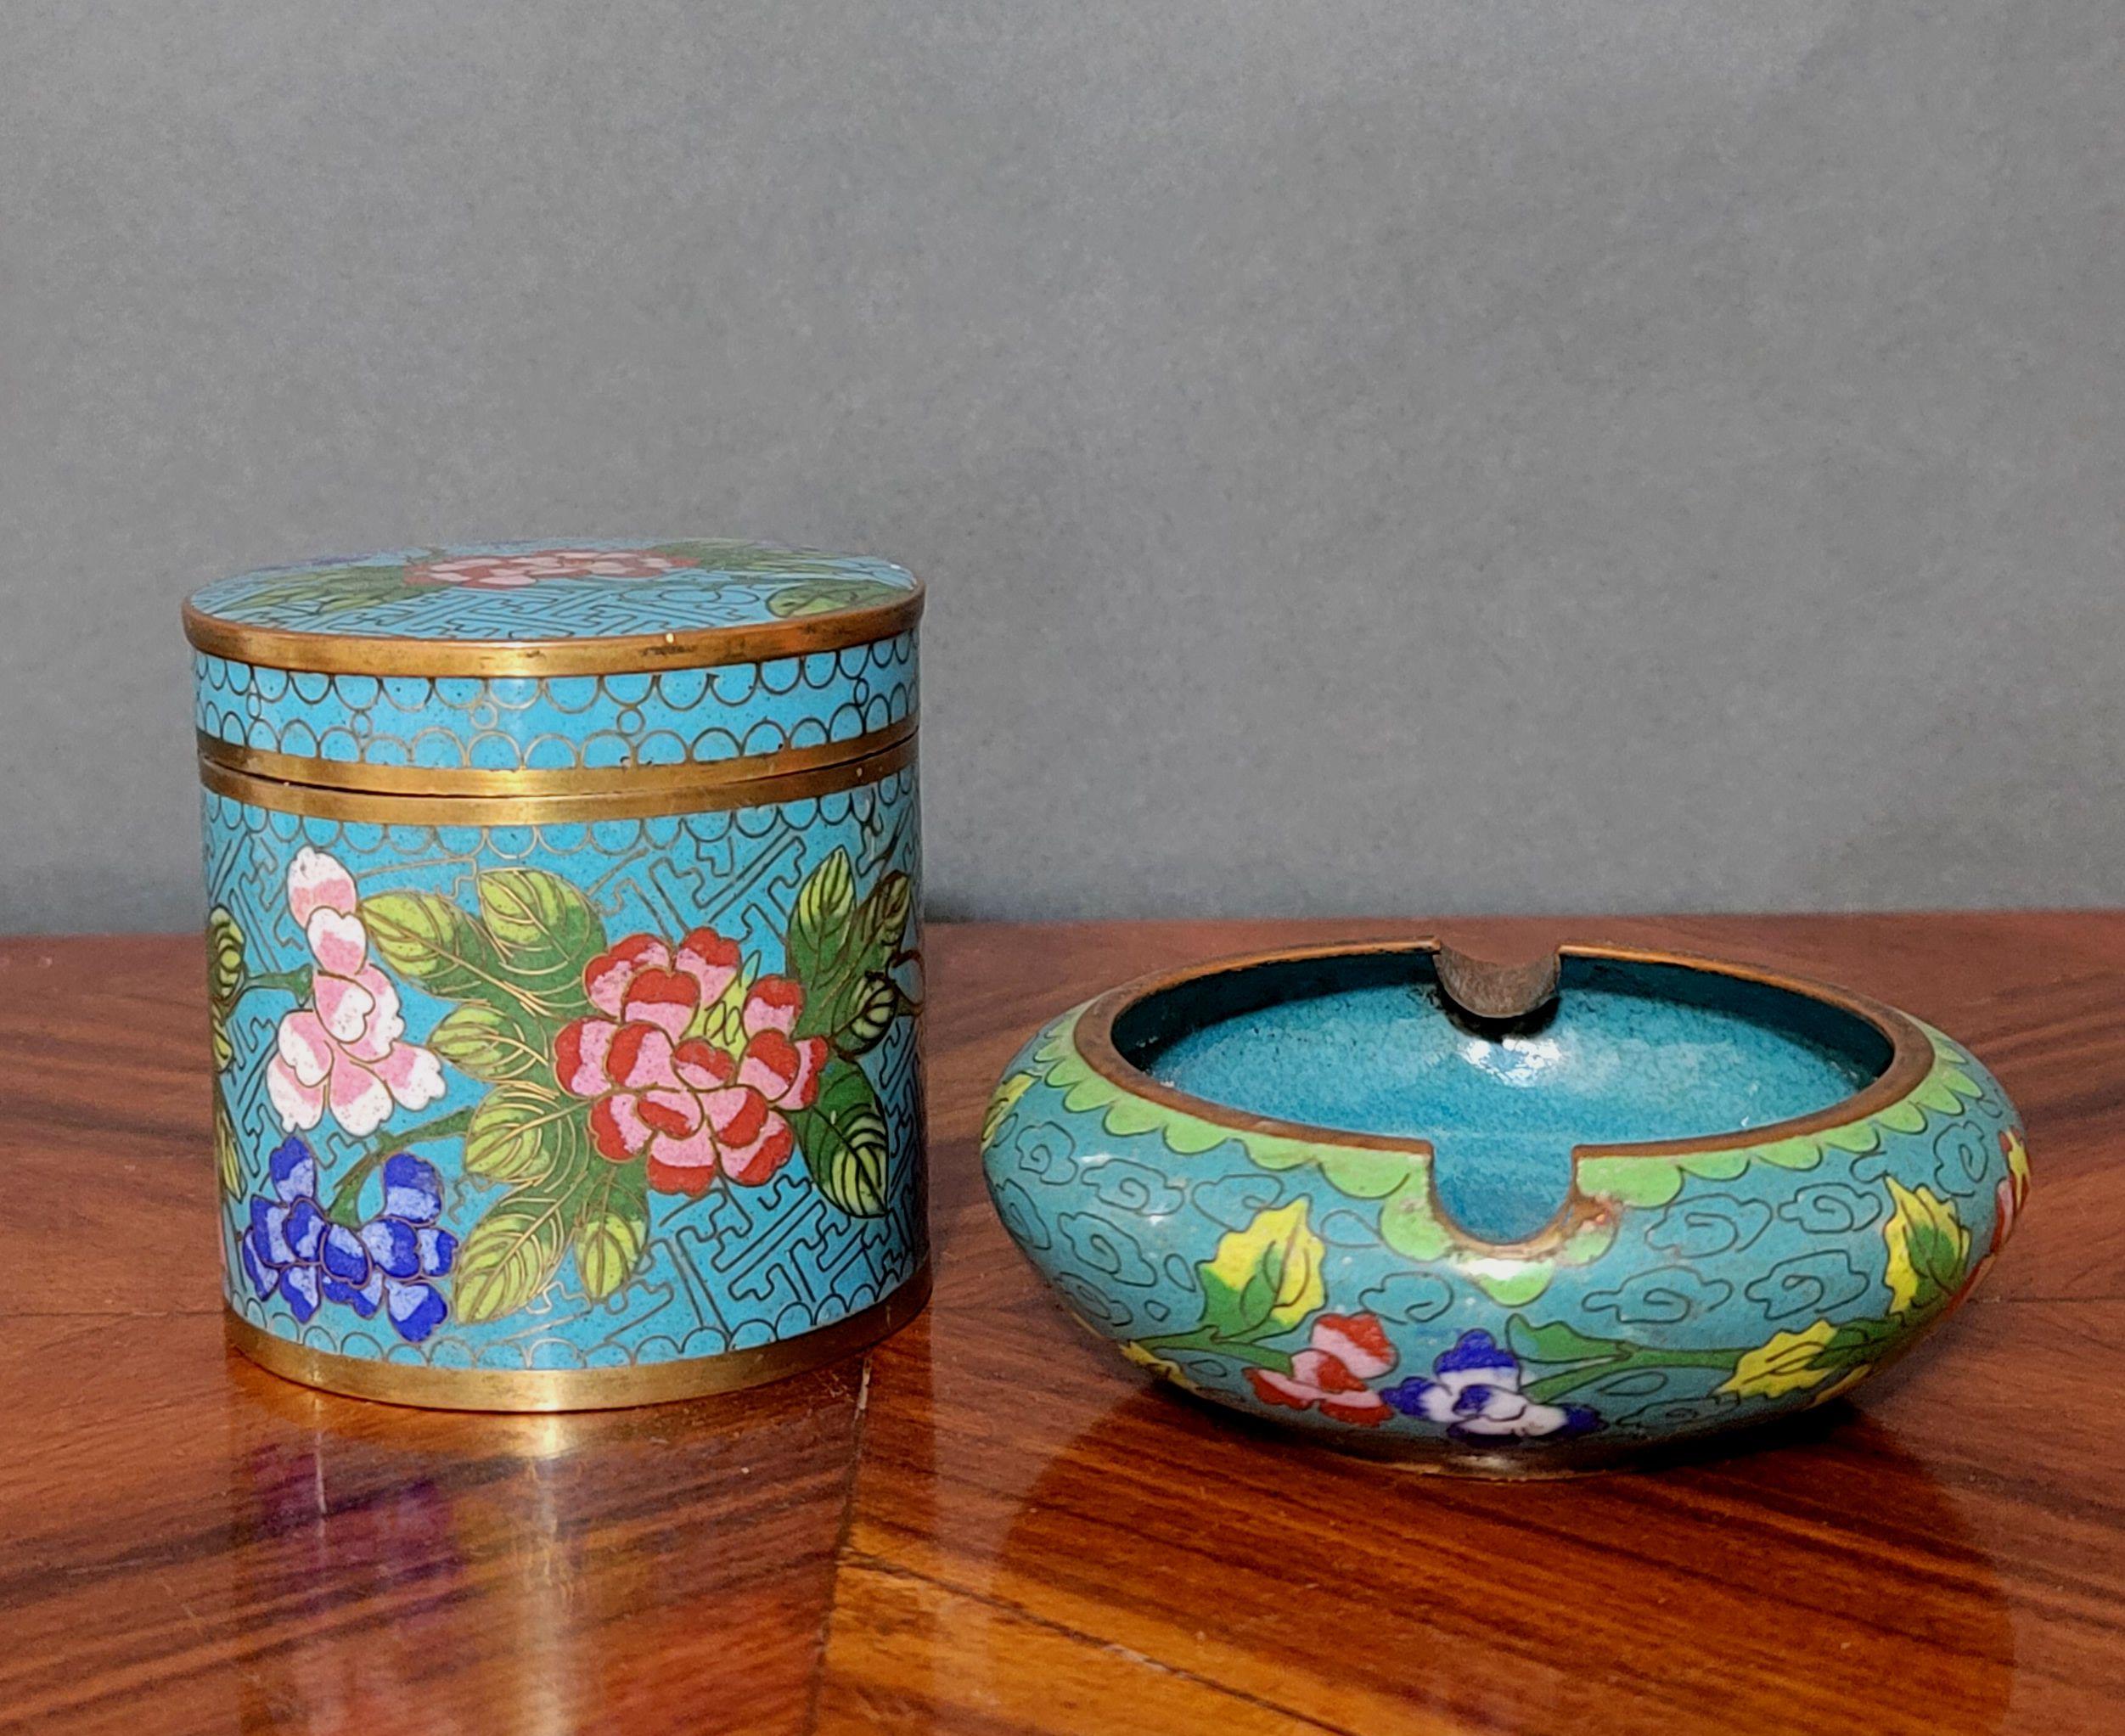 Presenting 2 antique of Chinese Matching Cloisonné Enamel cigarette case and ashtray, Blue.
Round Cigarette box: 3